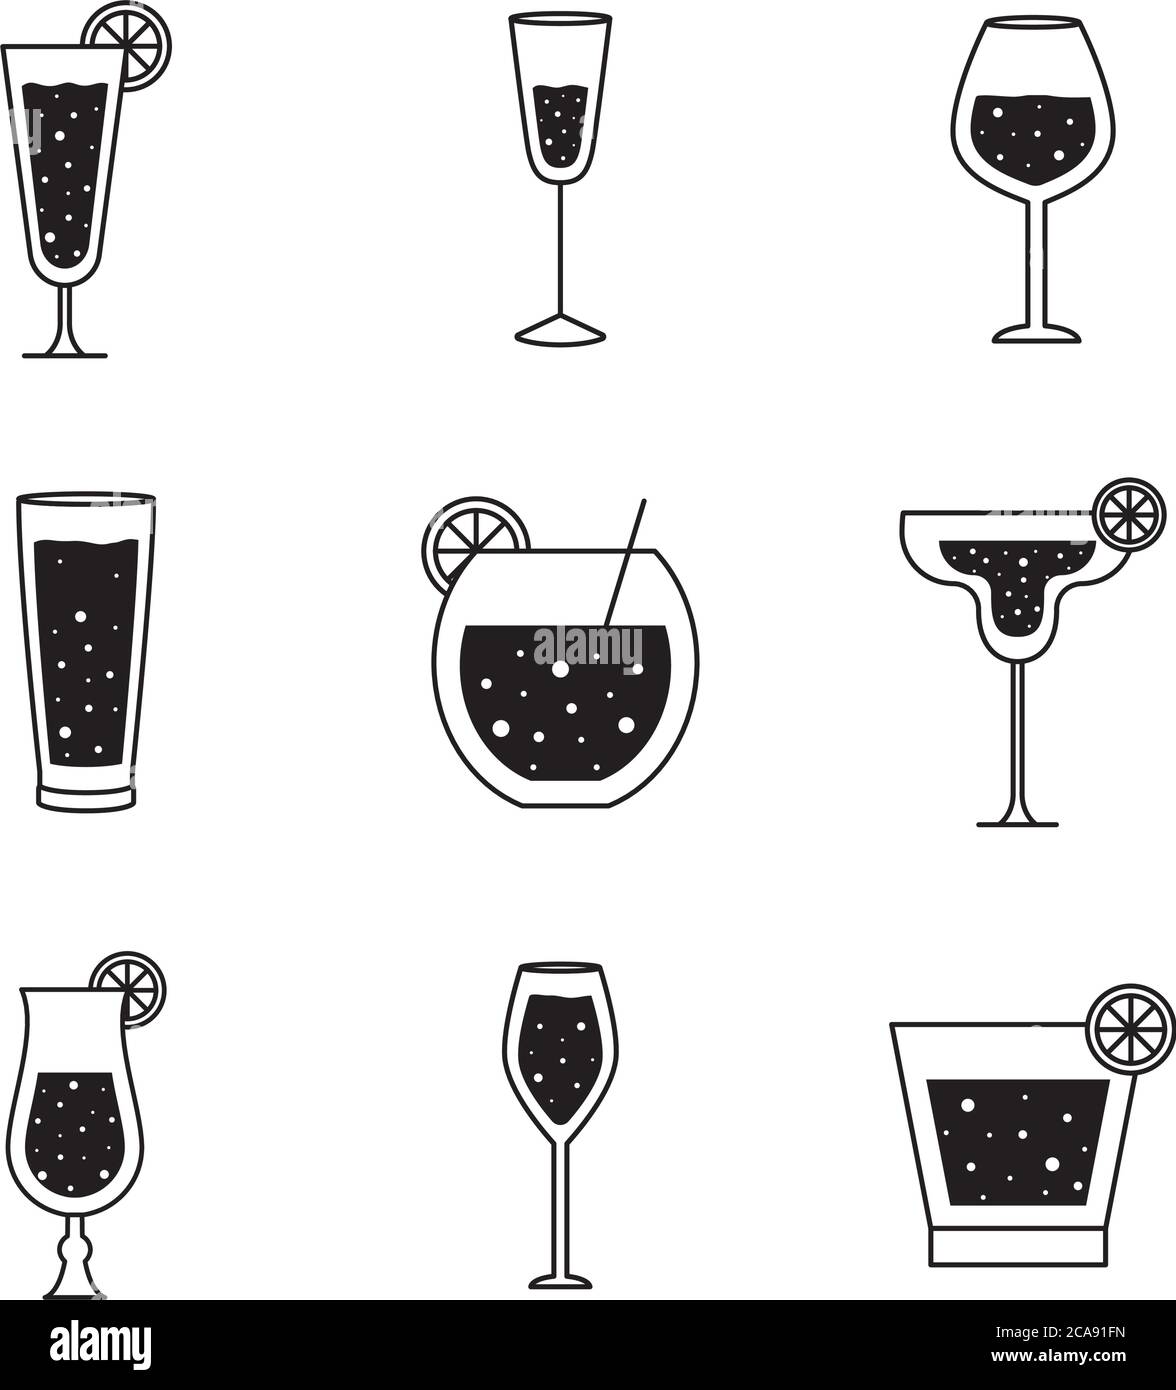 Cocktails glasses cups silhouette style icon set design, Alcohol drink bar and beverage theme Vector illustration Stock Vector